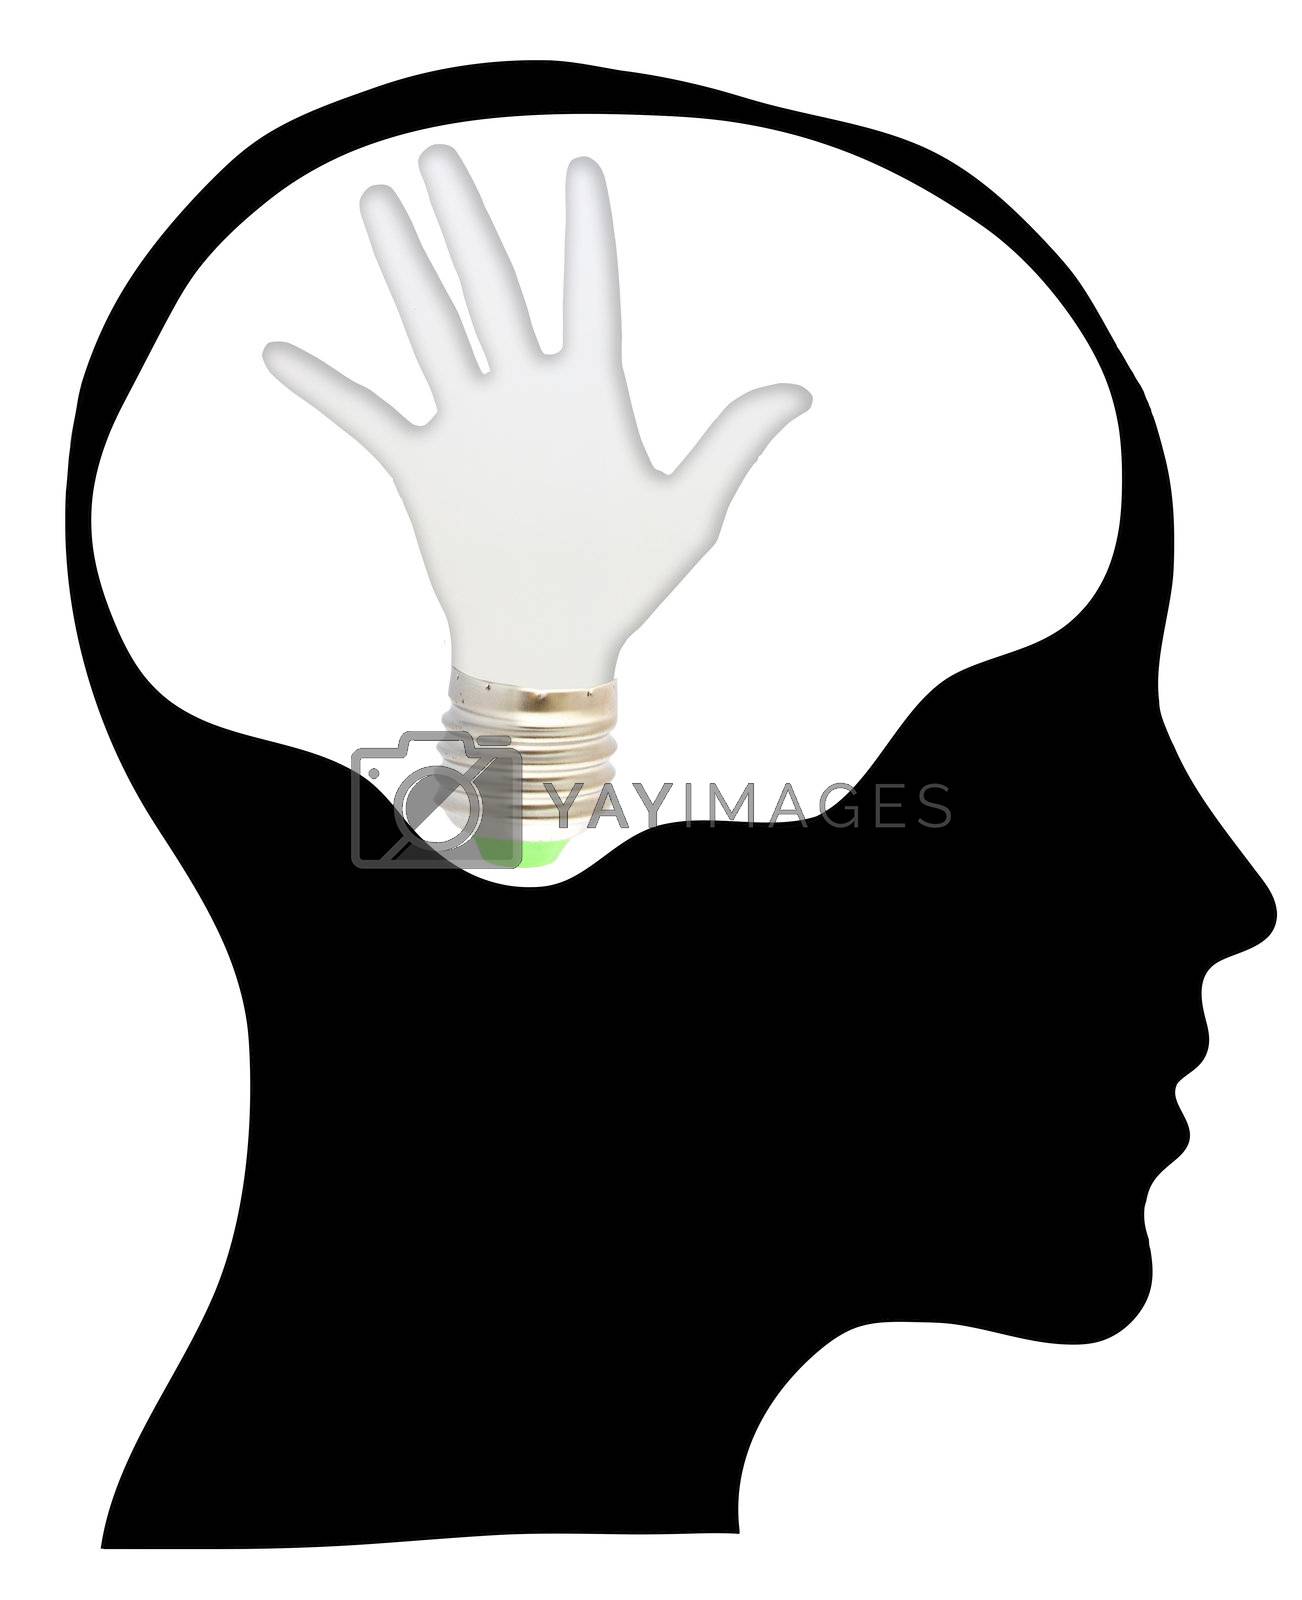 Royalty free image of bulb with ecology symbol in human head, by rufous